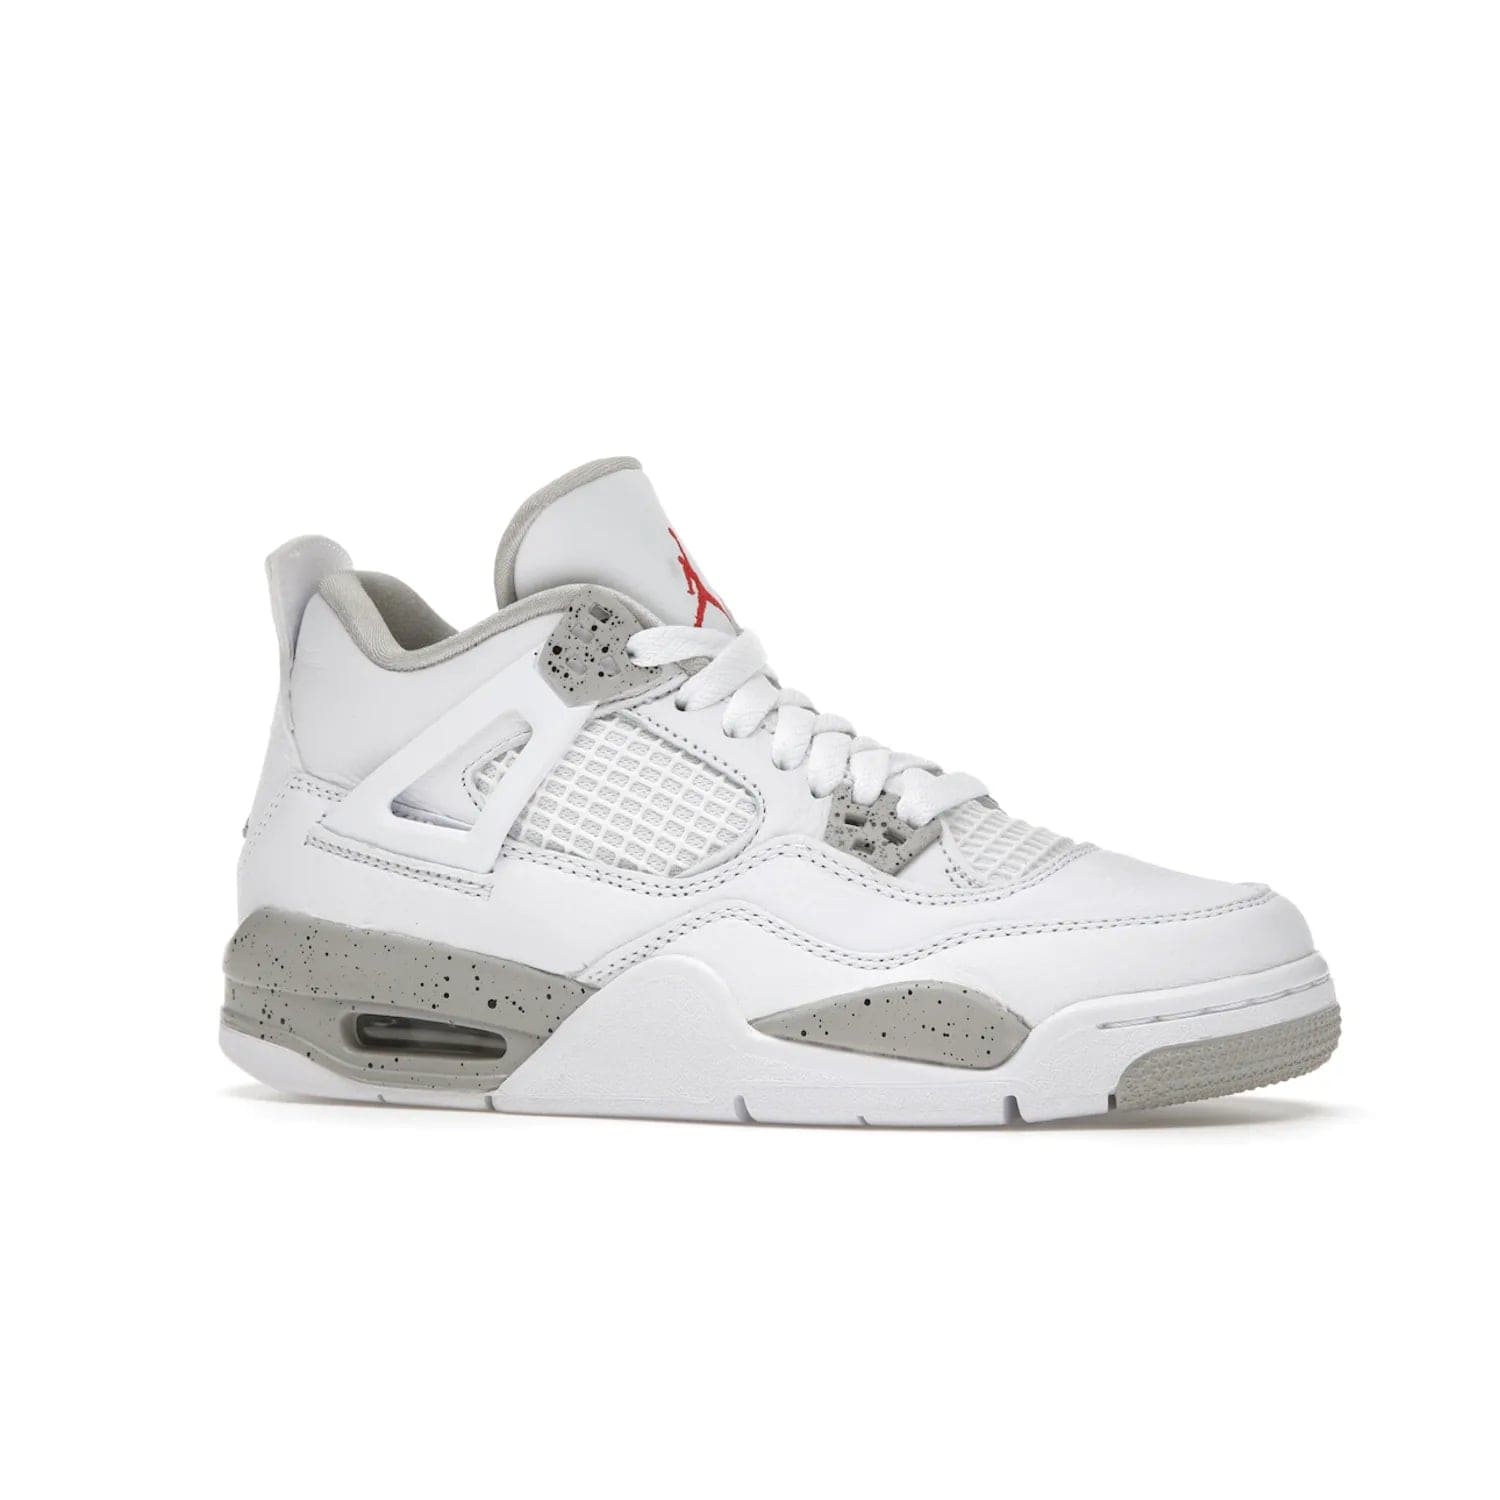 Jordan 4 Retro White Oreo (2021) (GS) - Image 3 - Only at www.BallersClubKickz.com - White Oreo Air Jordan 4 Retro 2021 GS - Iconic sneaker silhouette with white canvas upper, Tech Grey detailing, and Fire Red accents. Available July 2021.